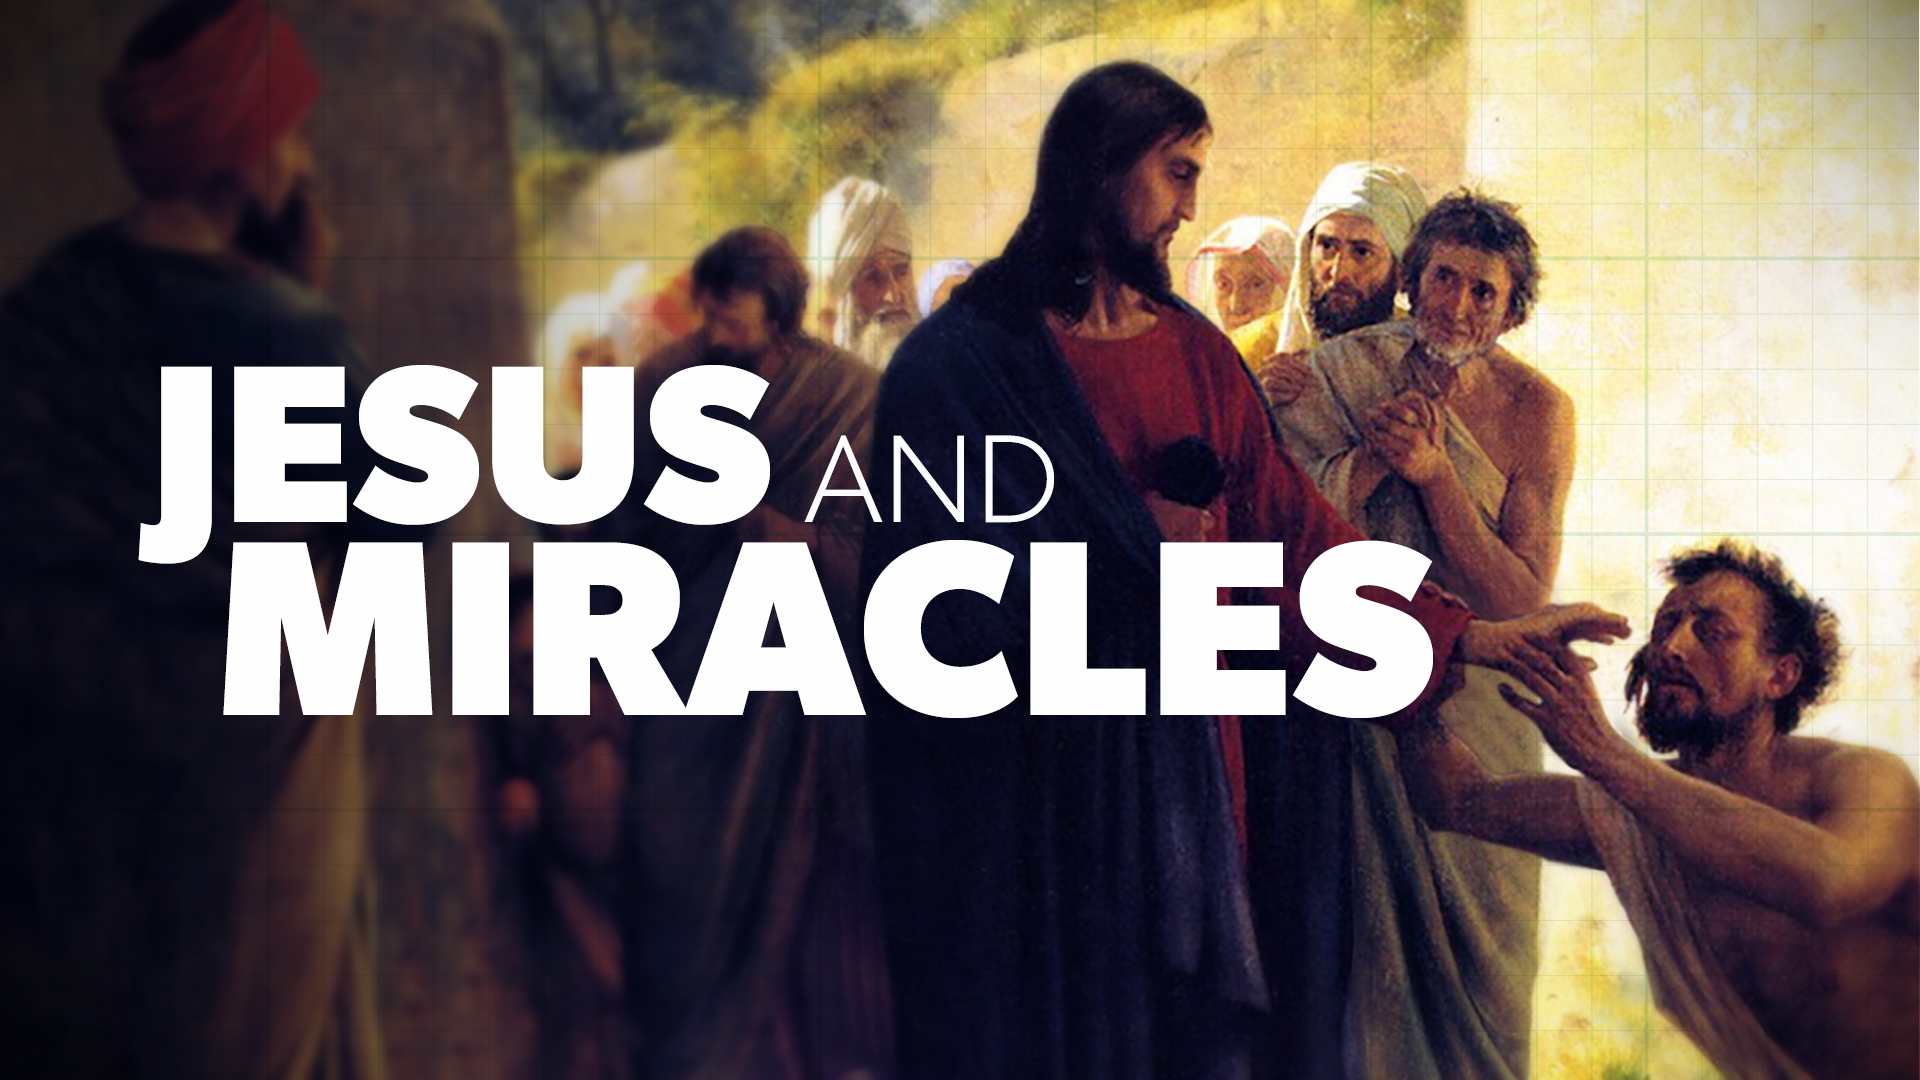 Jesus and miracles